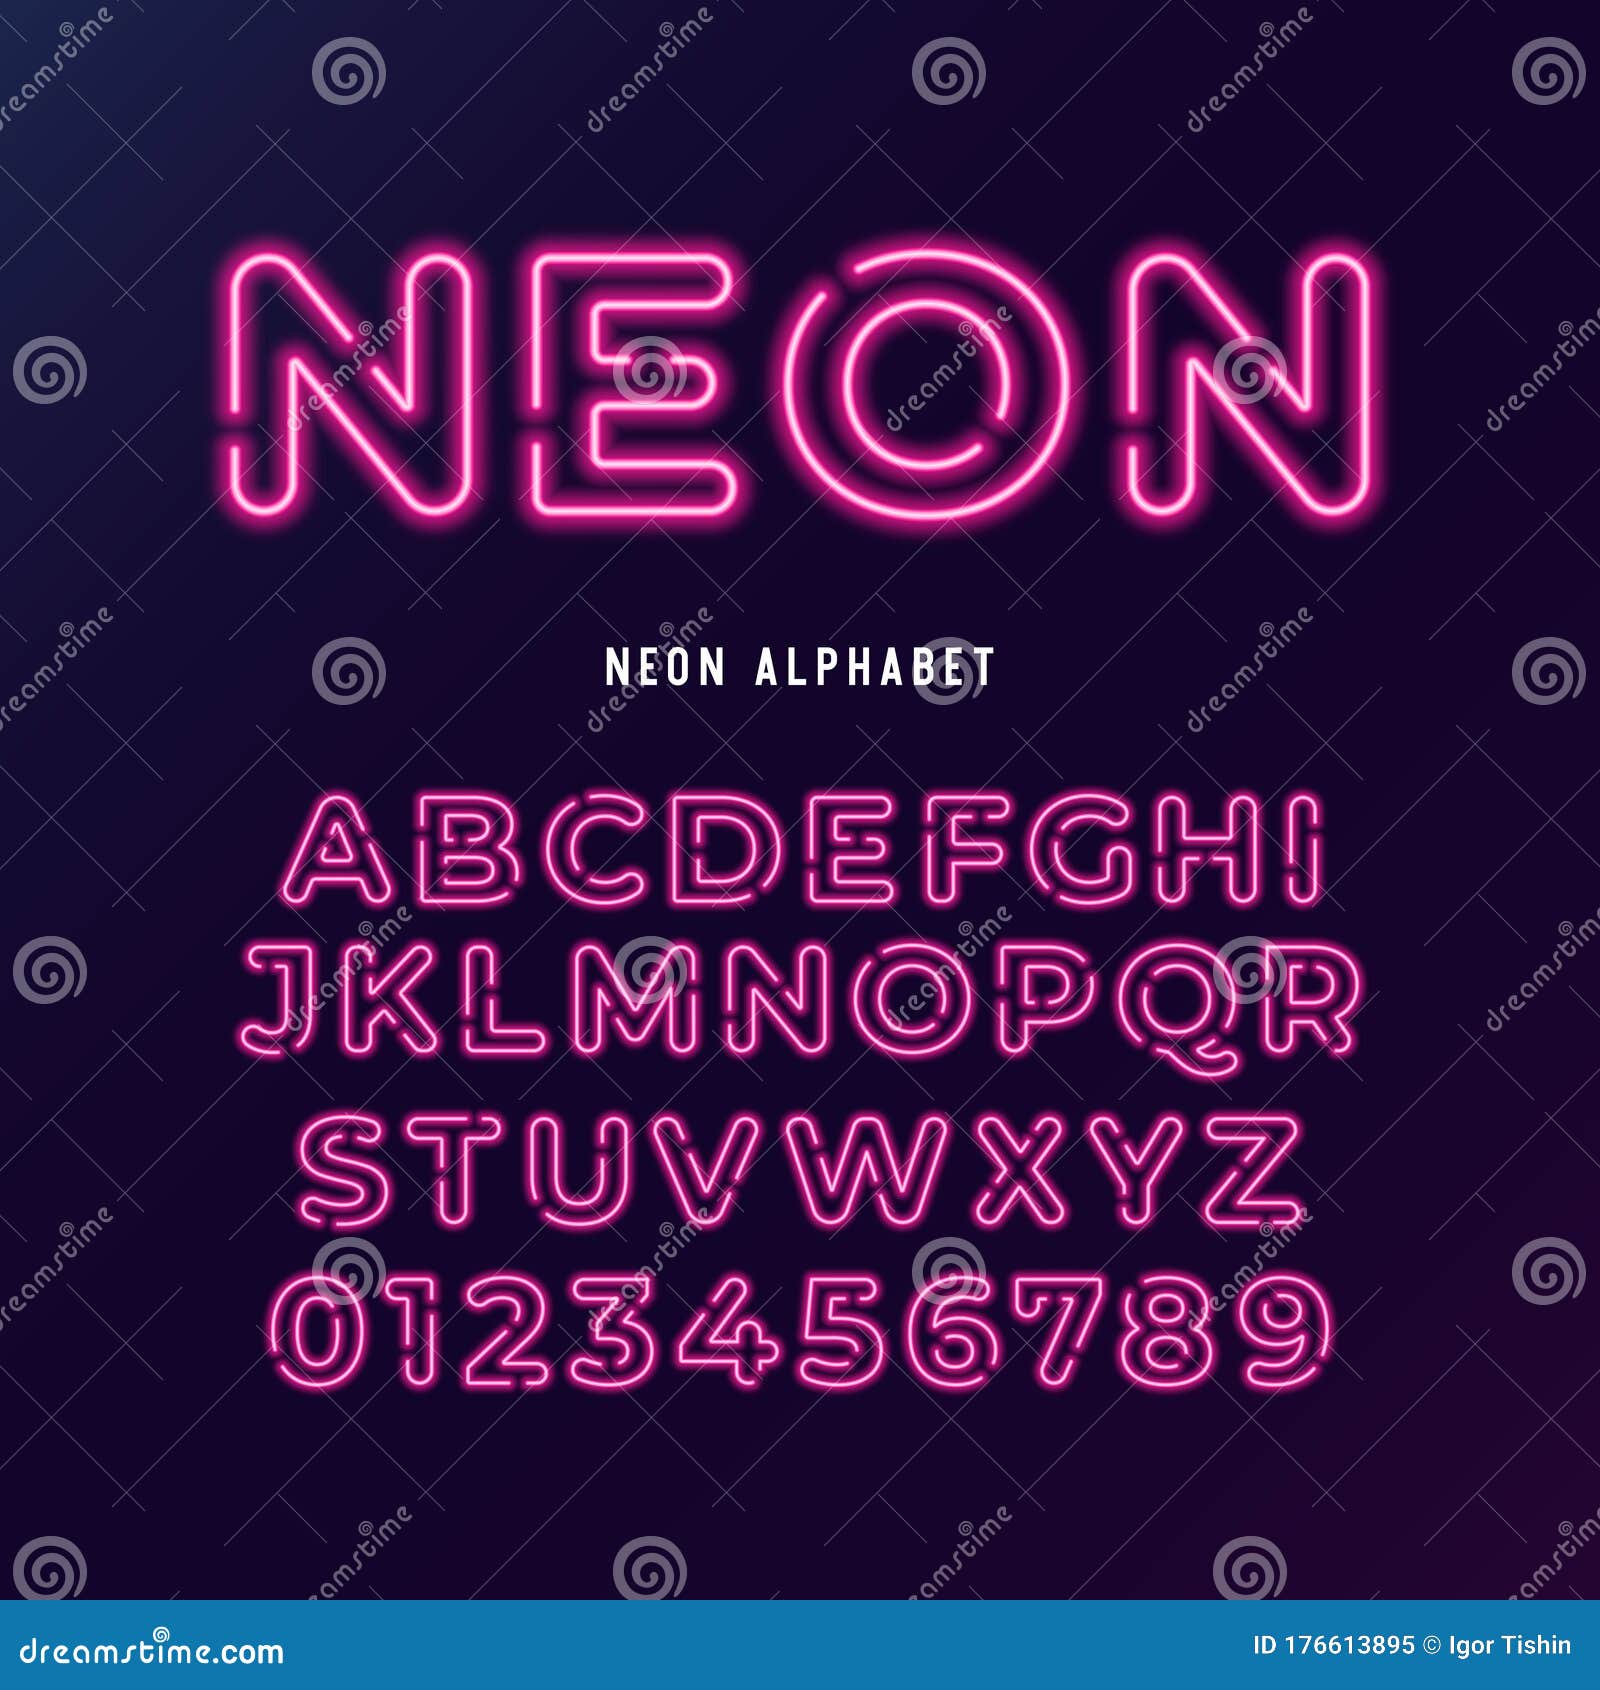 Neon Light Modern Font. Neon Tube Letters and Numbers on Dark ...